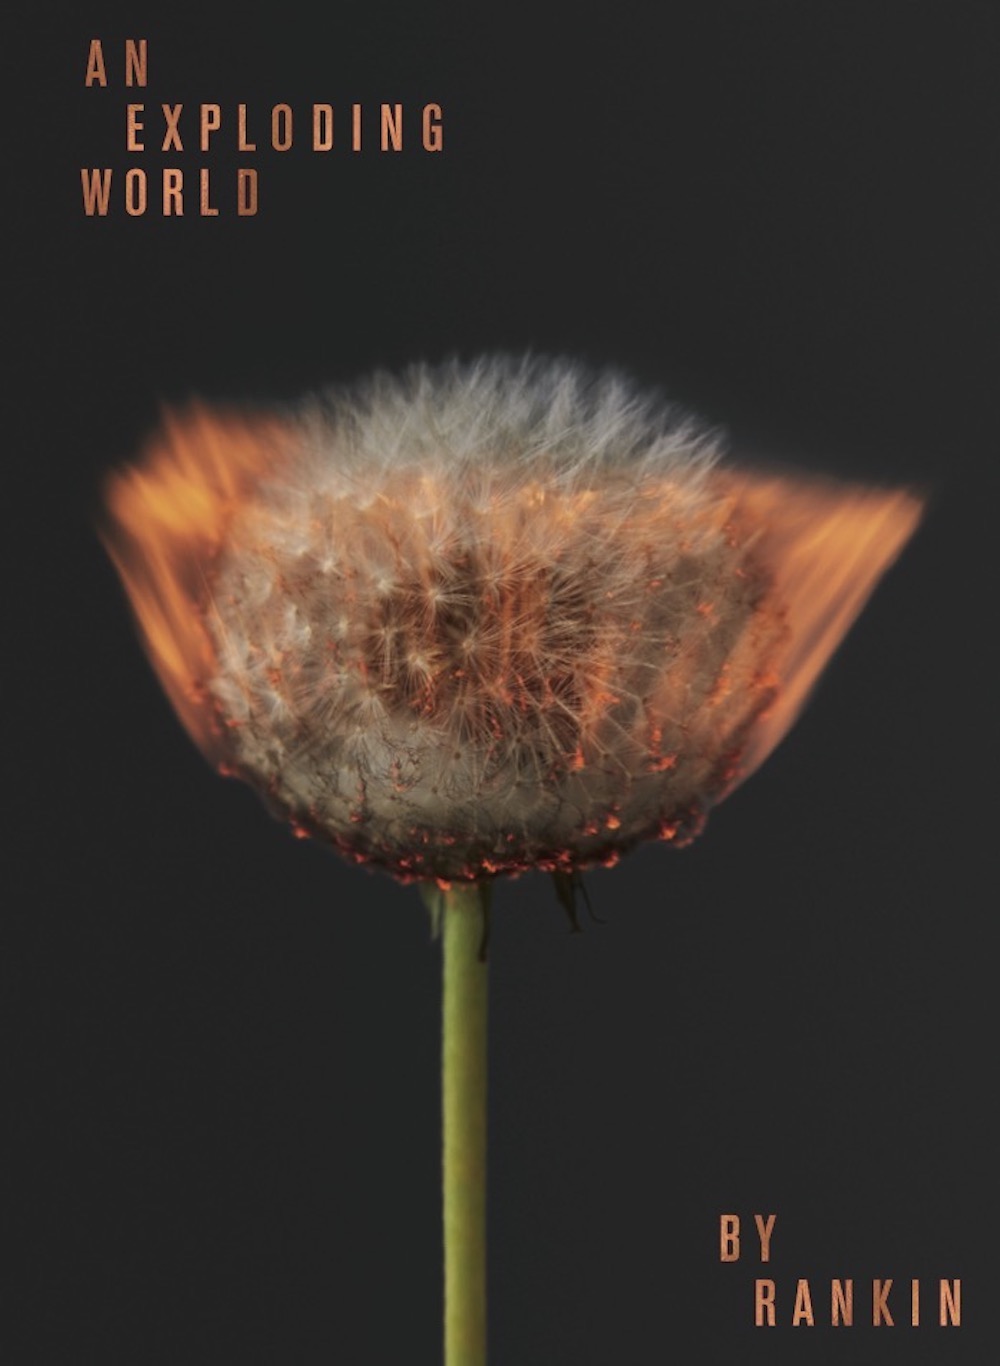 The front cover of Rankin's book An Exploding World. Image: Rankin/Rankin Publishing